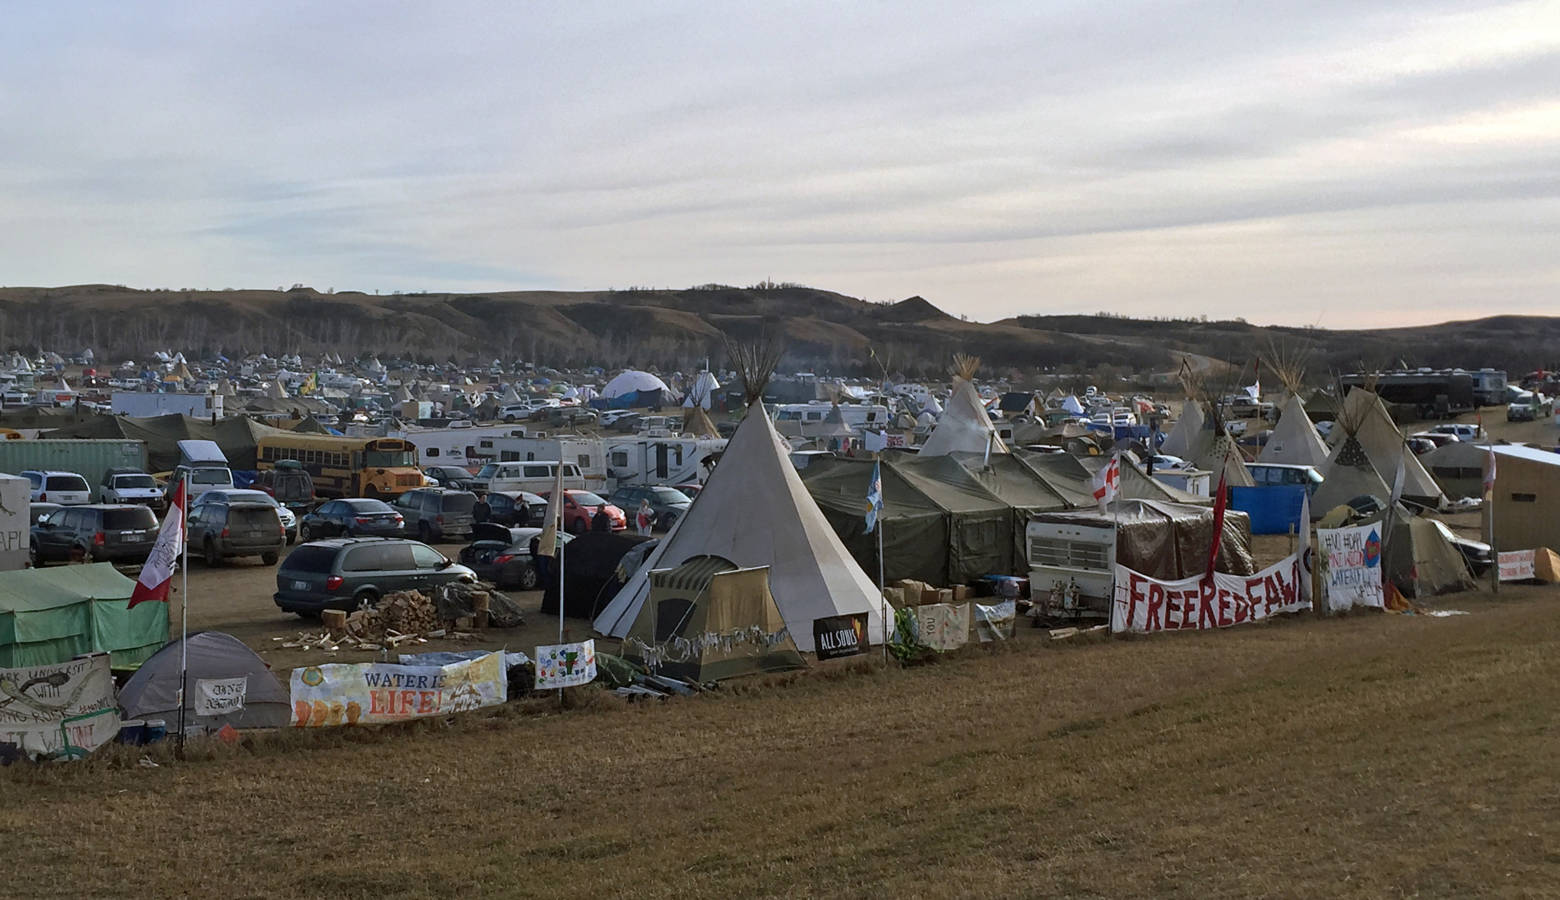 Oceti Sakowin Camp Standing Rock during the Dakota Access Pipeline protests, 2016 (Wikimedia Commons)